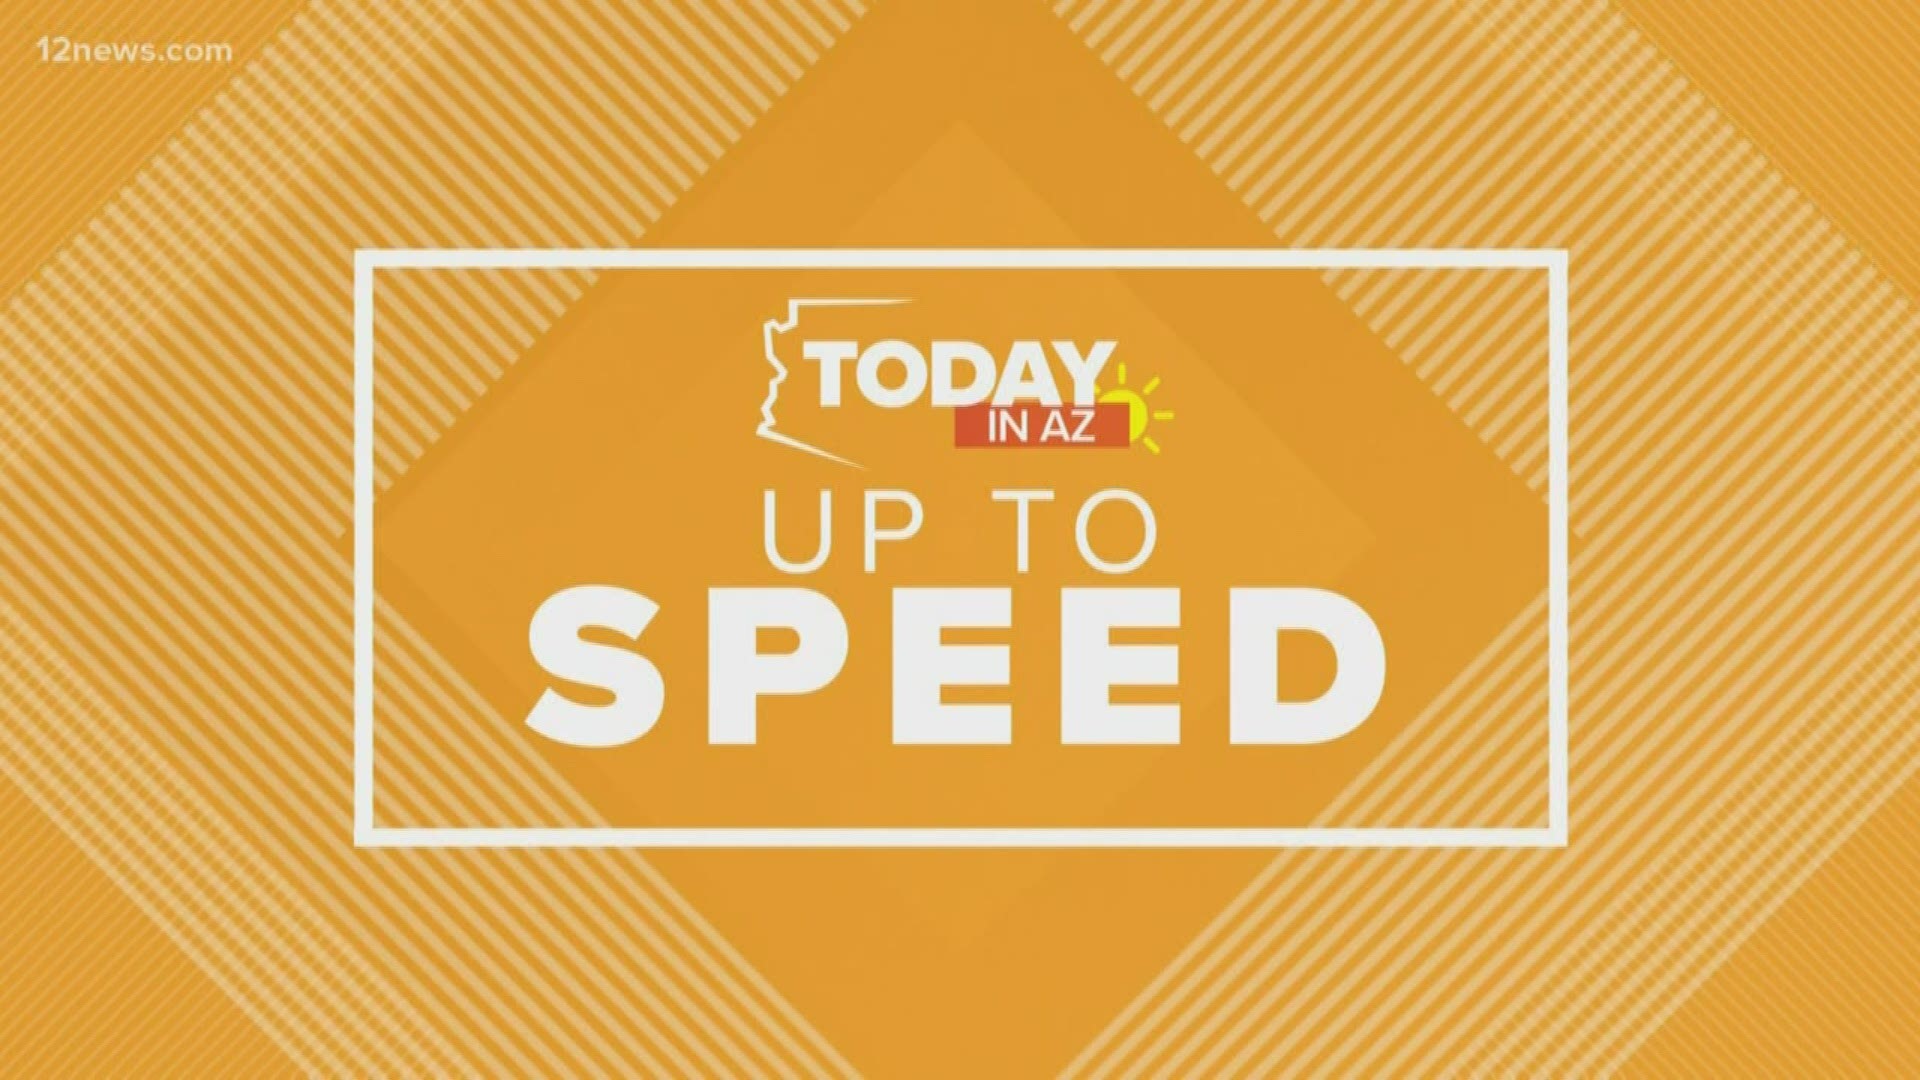 Get "Up to Speed" on the latest news happening around Arizona and across the country on Wednesday morning.